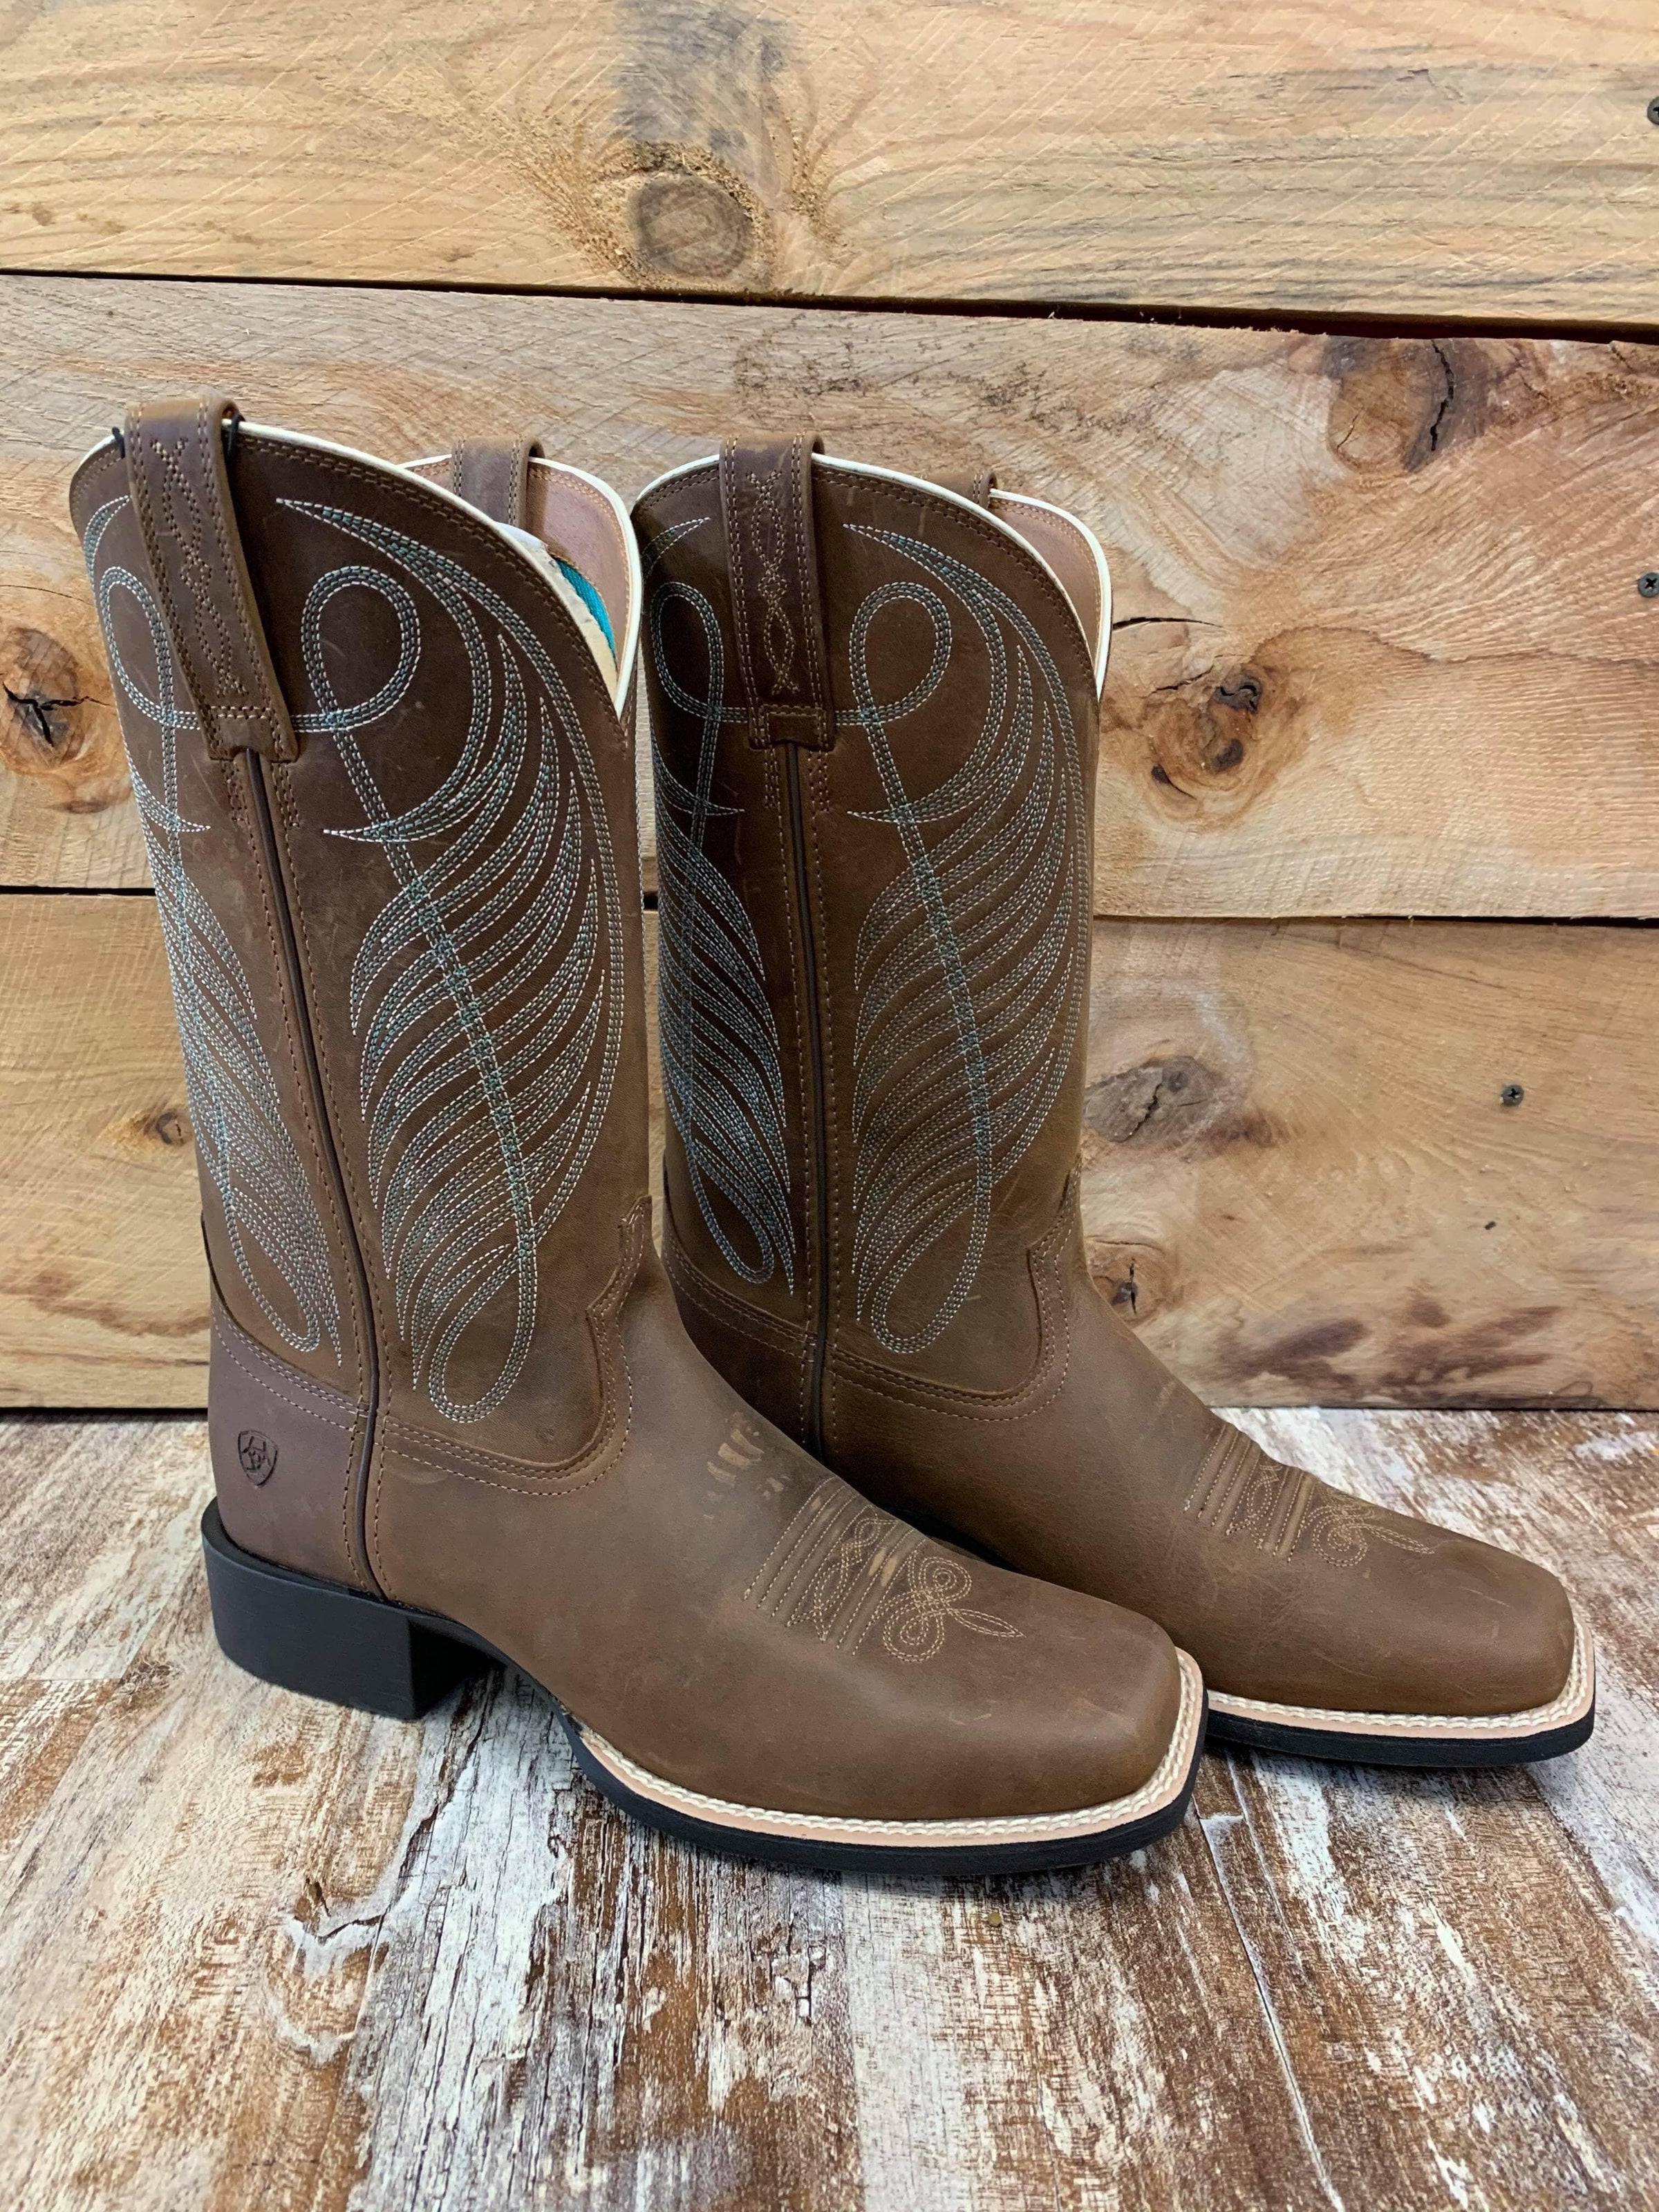 Ariat Women&s Round Up Powder Brown Wide Square Toe Western Boots